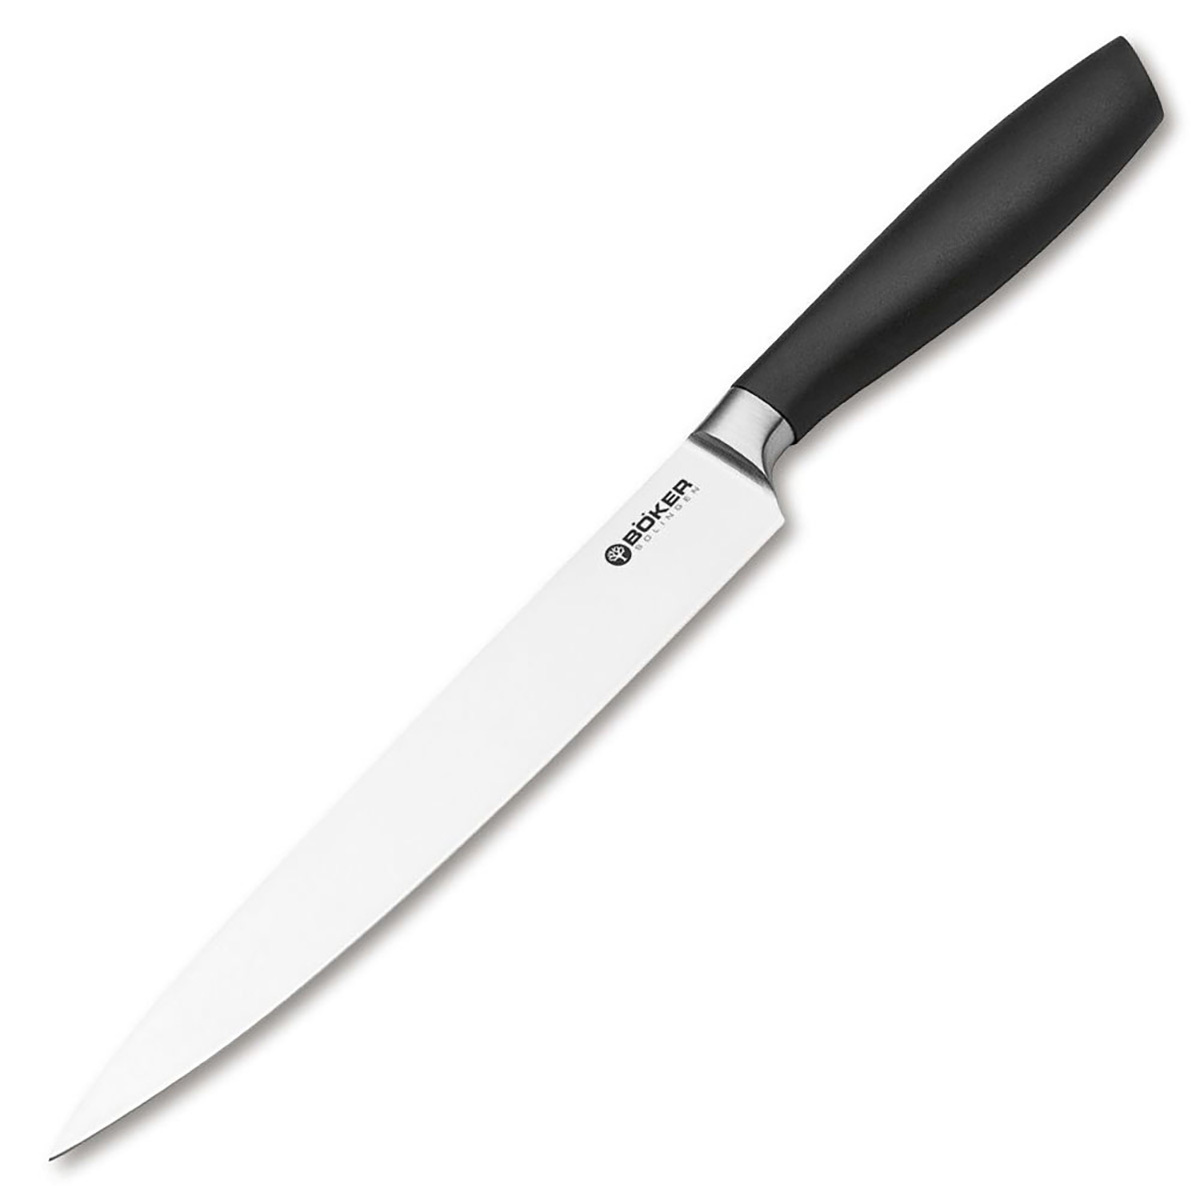     Boker Core Professional Carving Knife 20.7 ,  1.4116,  